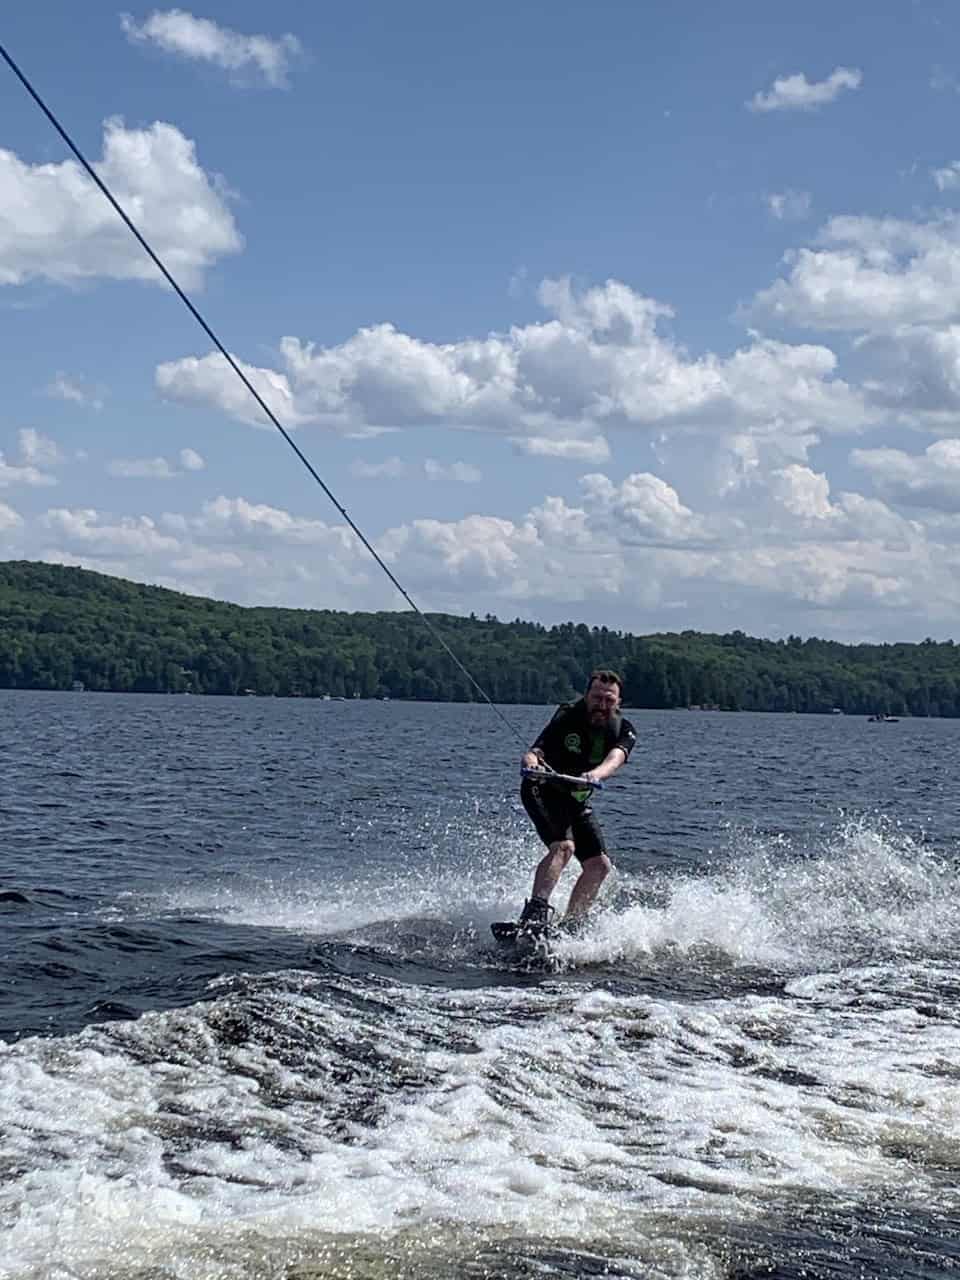 Wakeboarding on Mary Lake Ontario Canada - One of my favourite activities on Mary Lake in Huntsville, Ontario is wakeboarding. It is almost like snowboarding, but on water instead of snow.